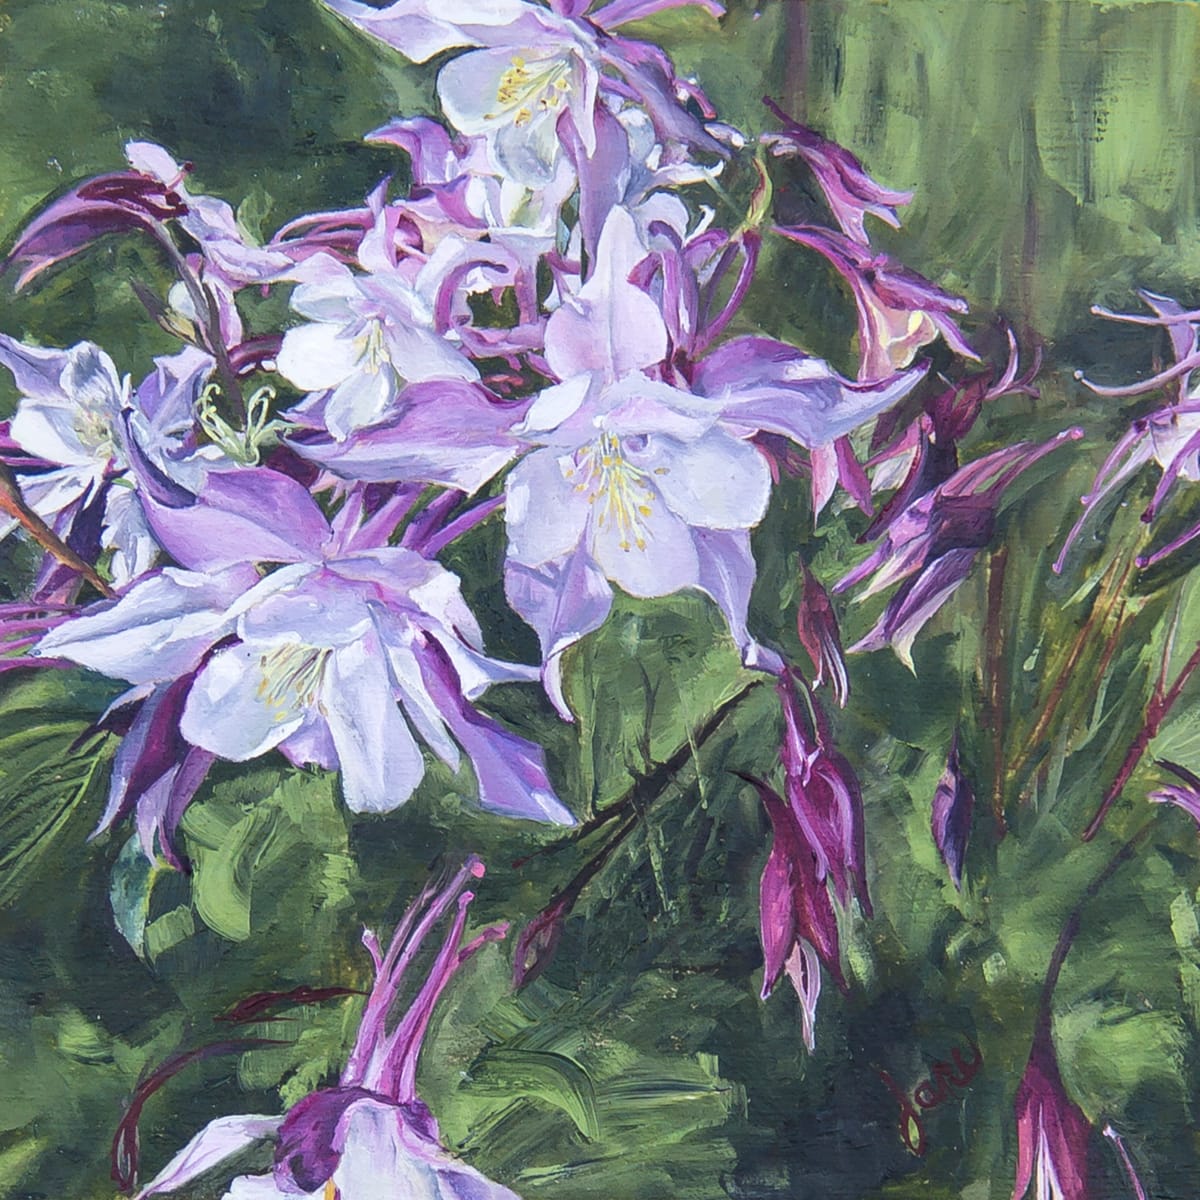 Columbine Chaos by Nila Jane Autry  Image: Columbine is such a delicate little flower, and appears to be dancing.  Growing profusely at the Fawson Farm here in my hometown of Grantsville, Utah, I wandered looking for the perfect painting, and I found this.  Painting en plein air is something I love to do but I also love the control I have in my Art Studio.  This is a combination piece, begun in plein air and finished in studio.  I love what Columbine Flowers stand for, and have painted them many times, always in their environment. 